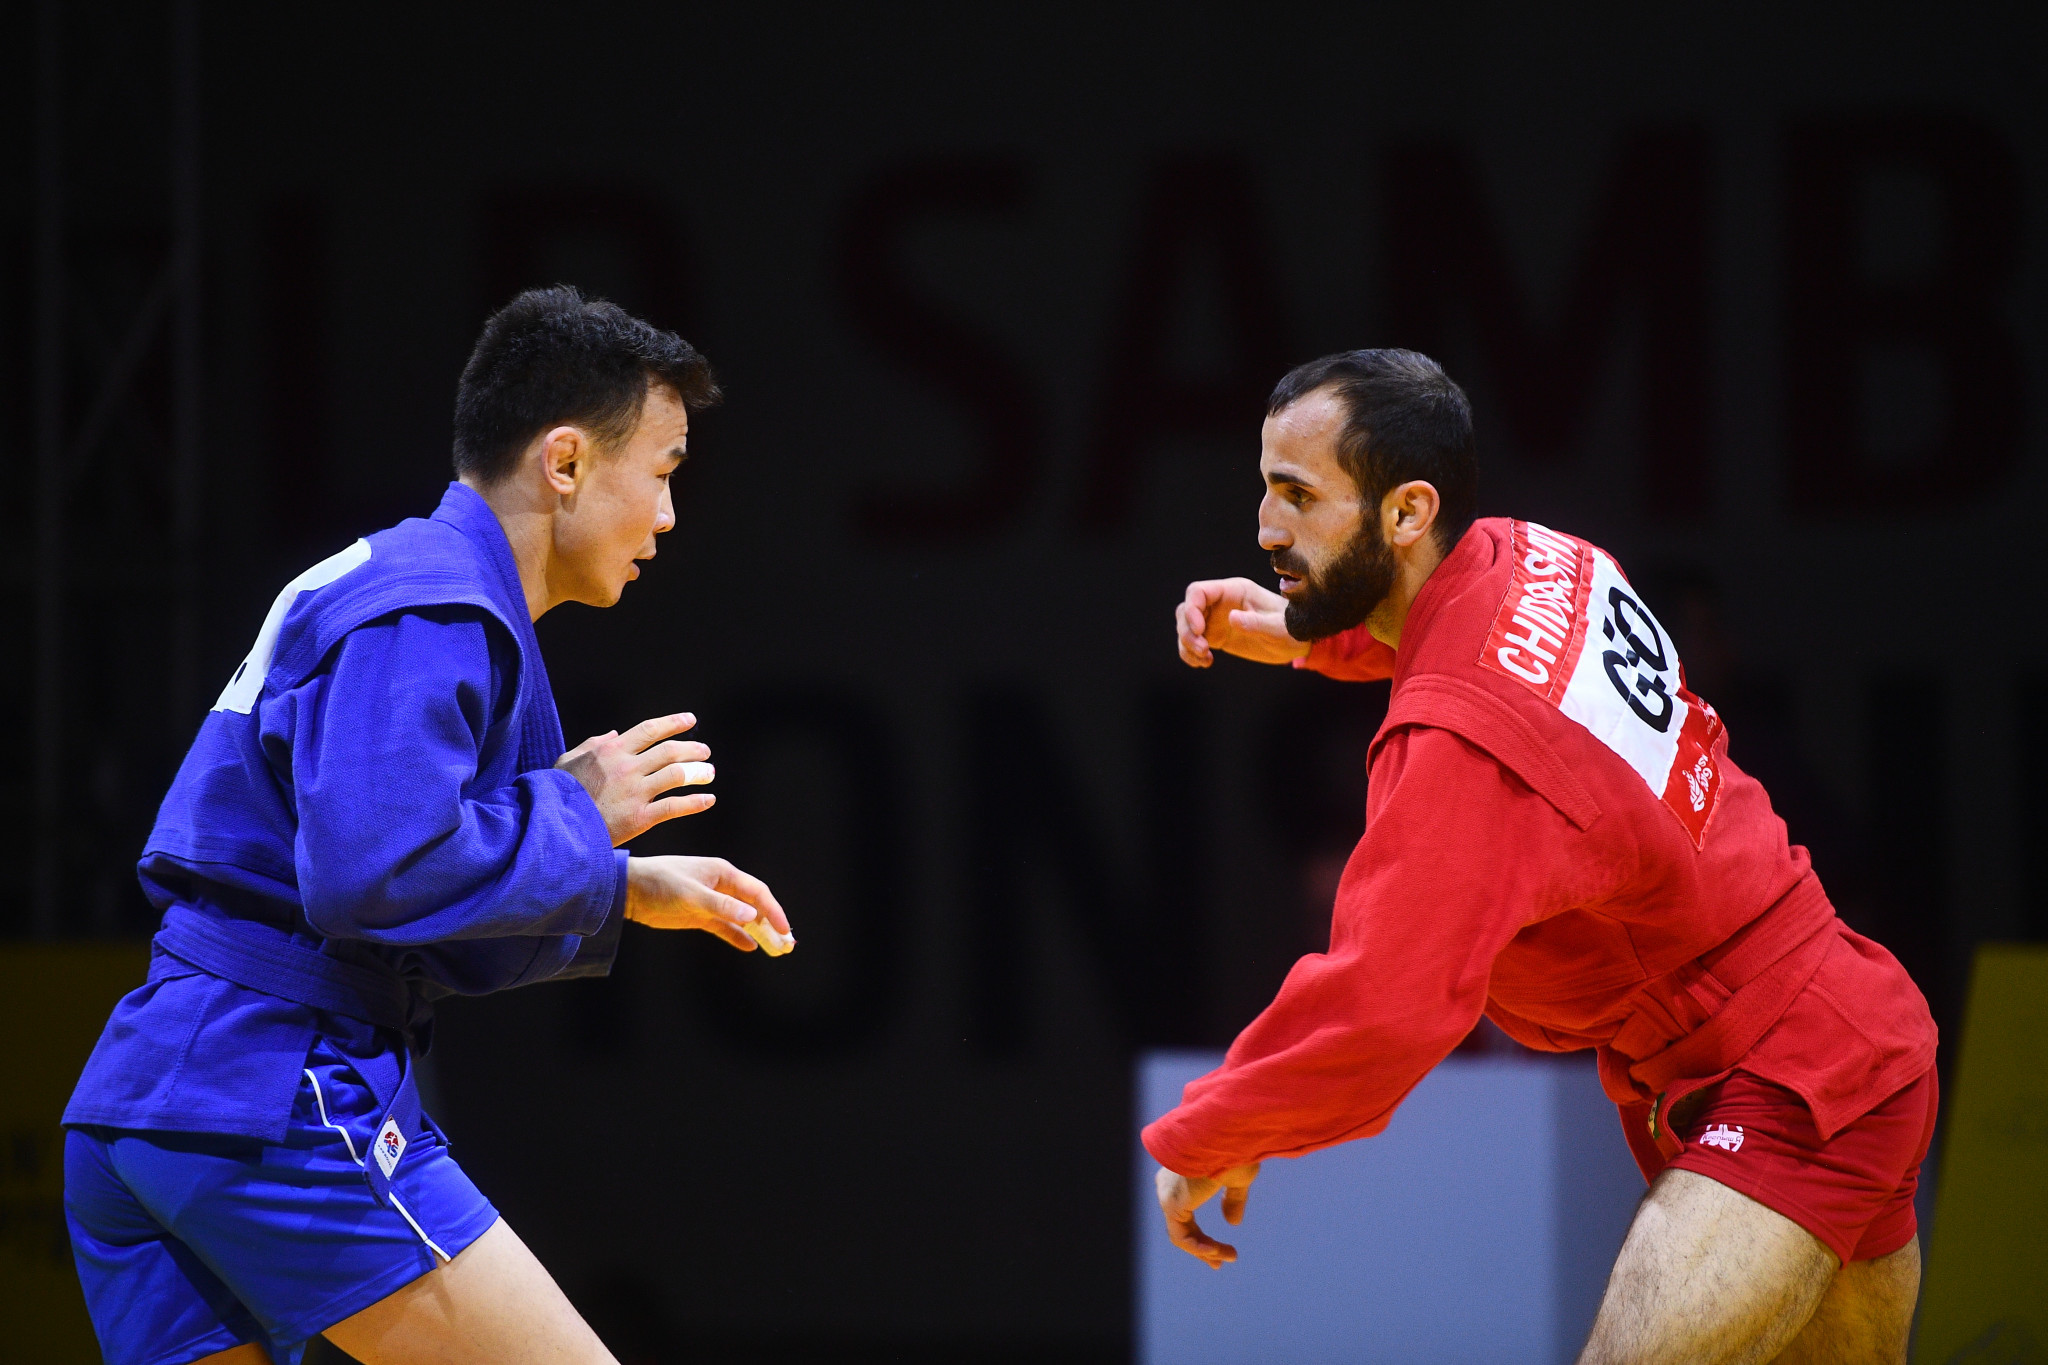 Vakhtangi Chidrashvili, in red, claimed Georgia's first gold of the Championships by defeating Sayan Khertek from Russia ©FIAS 